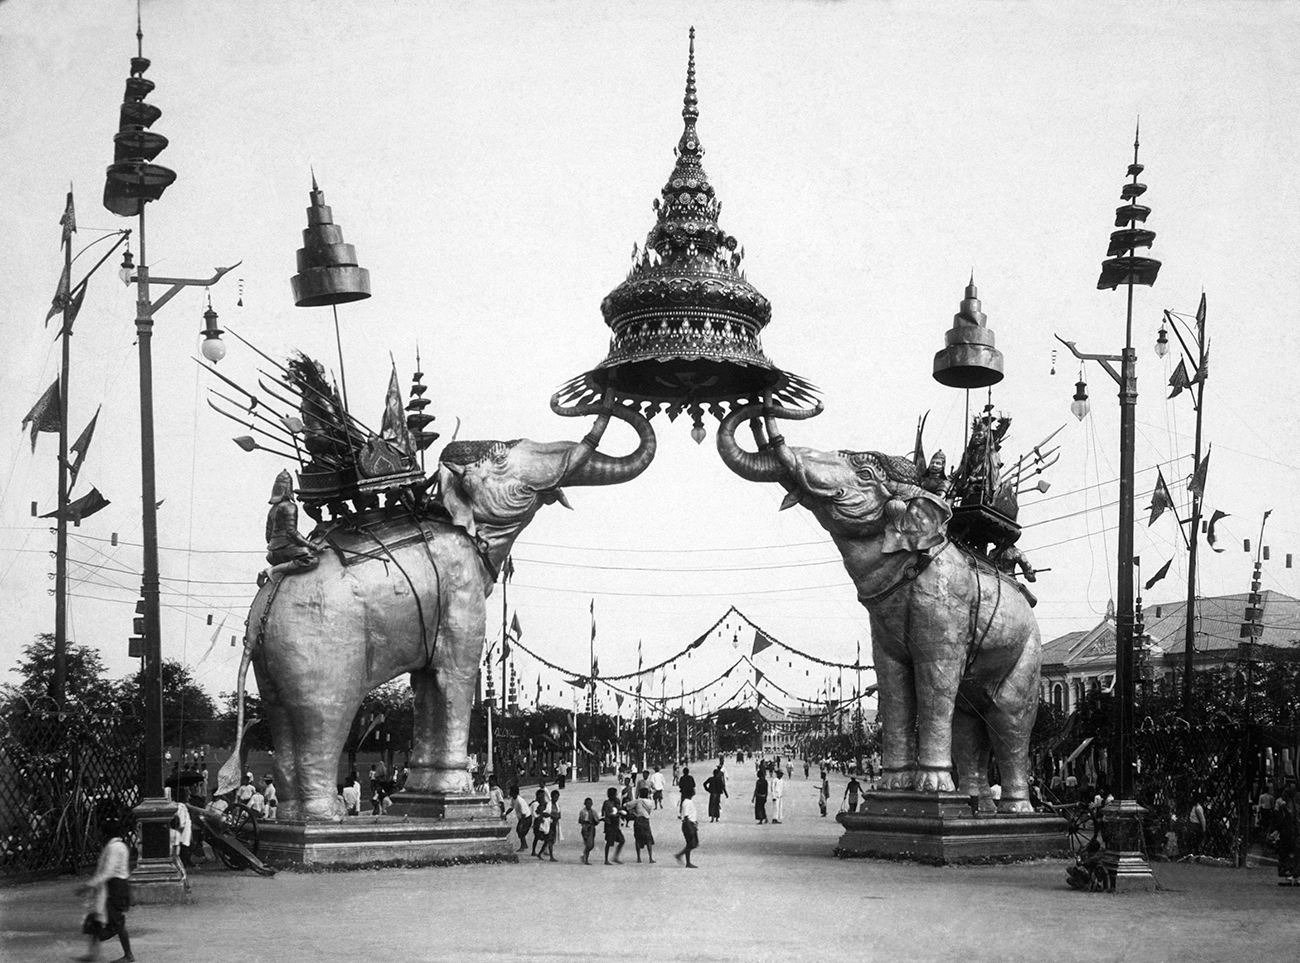 Two huge elephants carrying seats form a triumphal arch in Bangkok, Thailand. It was built in honour of the late Chulalongkorn, king of Siam, who visited Europe in 1897